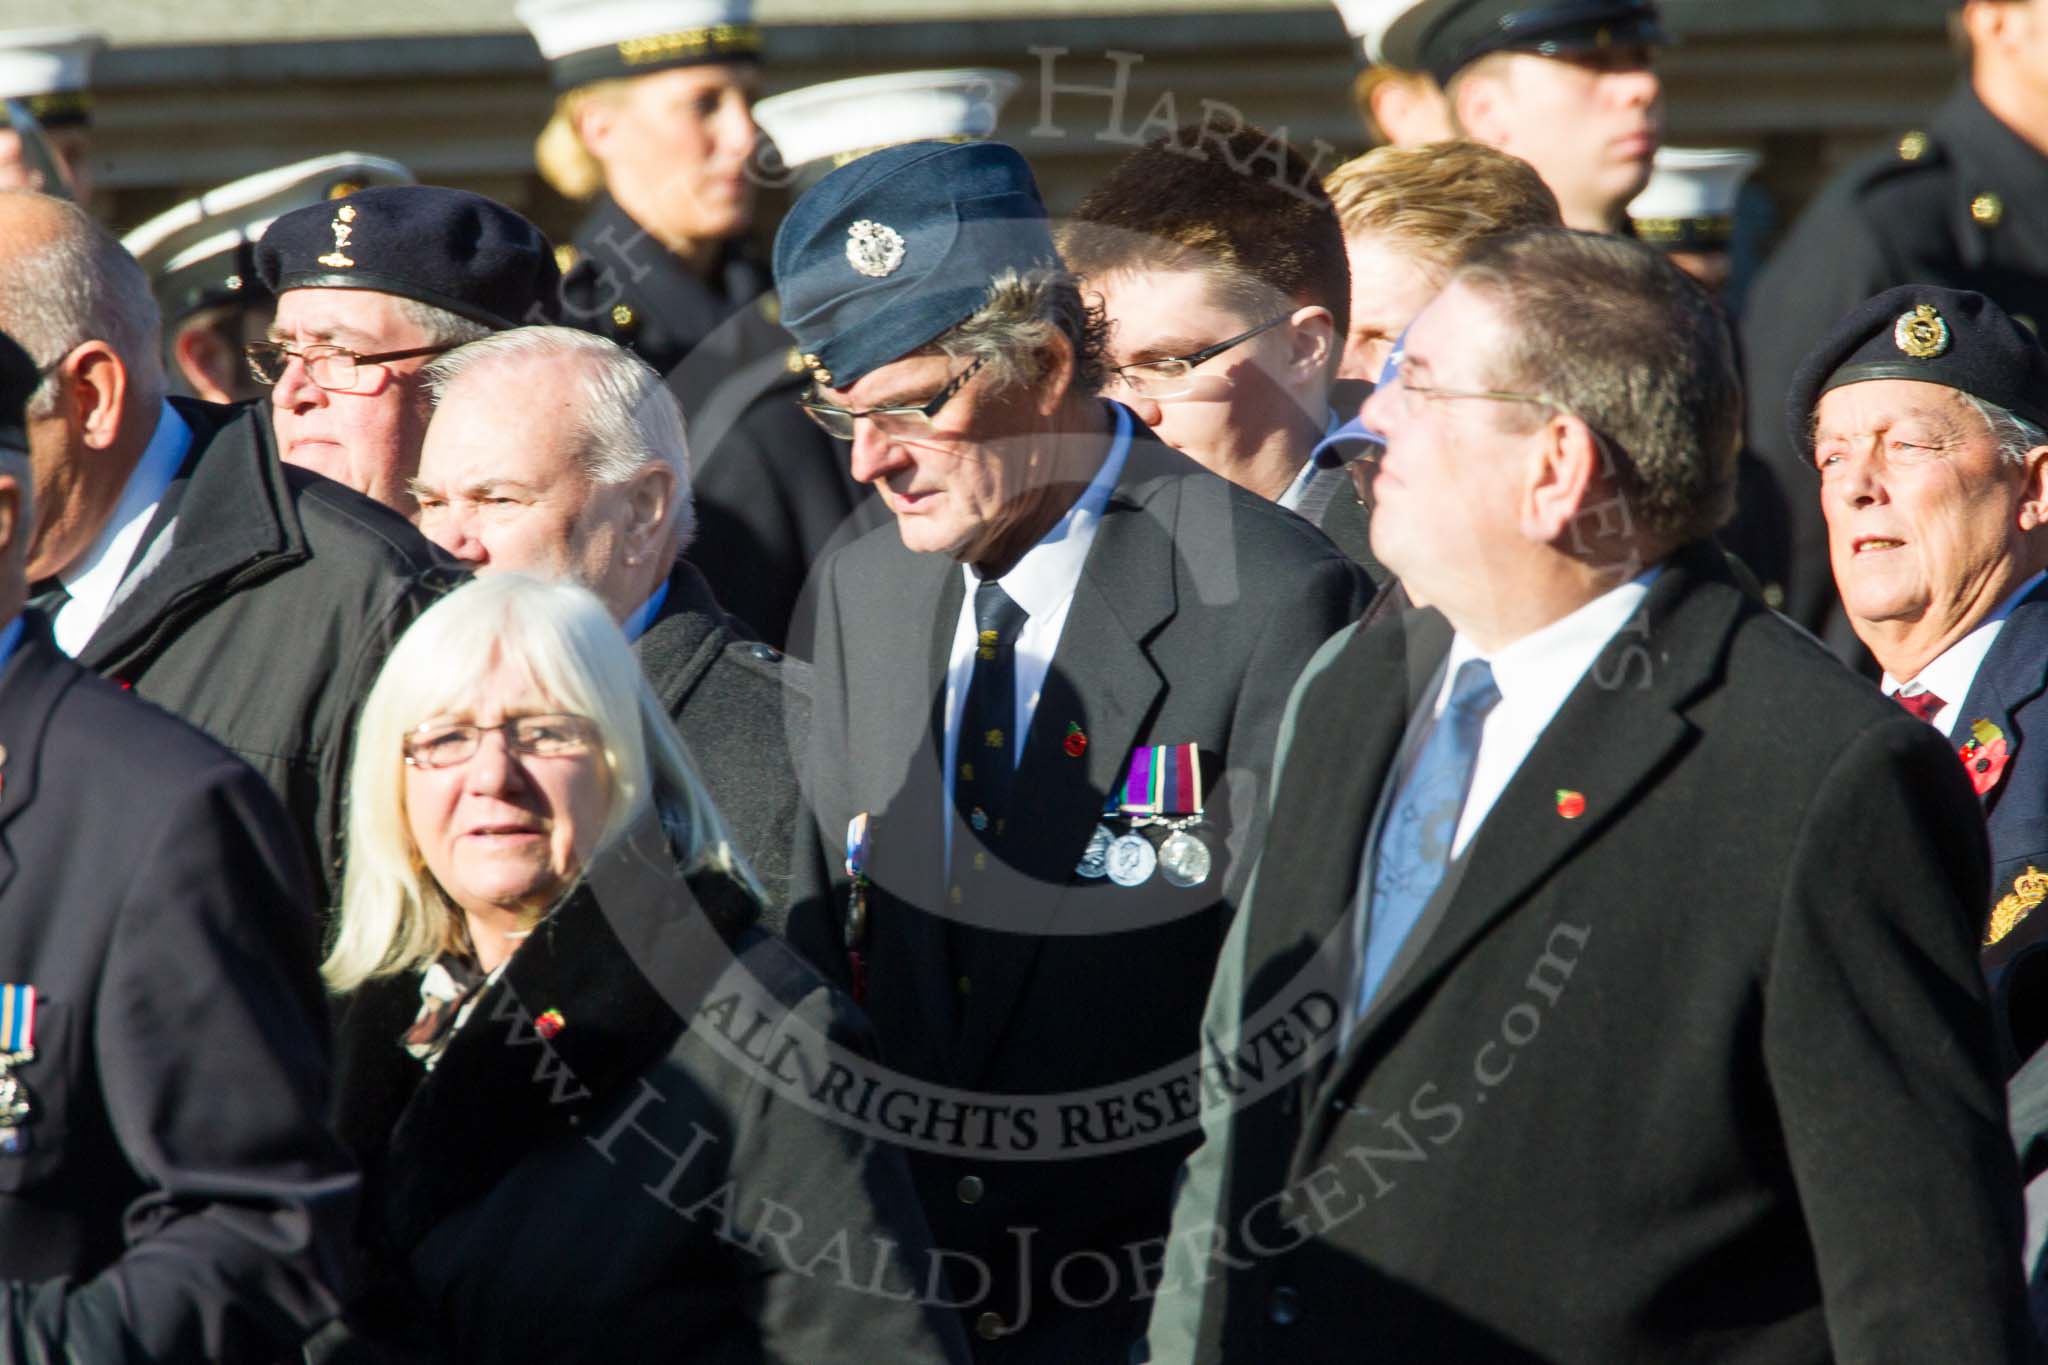 Remembrance Sunday at the Cenotaph in London 2014: Group F15 - National Gulf Veterans & Families Association.
Press stand opposite the Foreign Office building, Whitehall, London SW1,
London,
Greater London,
United Kingdom,
on 09 November 2014 at 11:58, image #1041